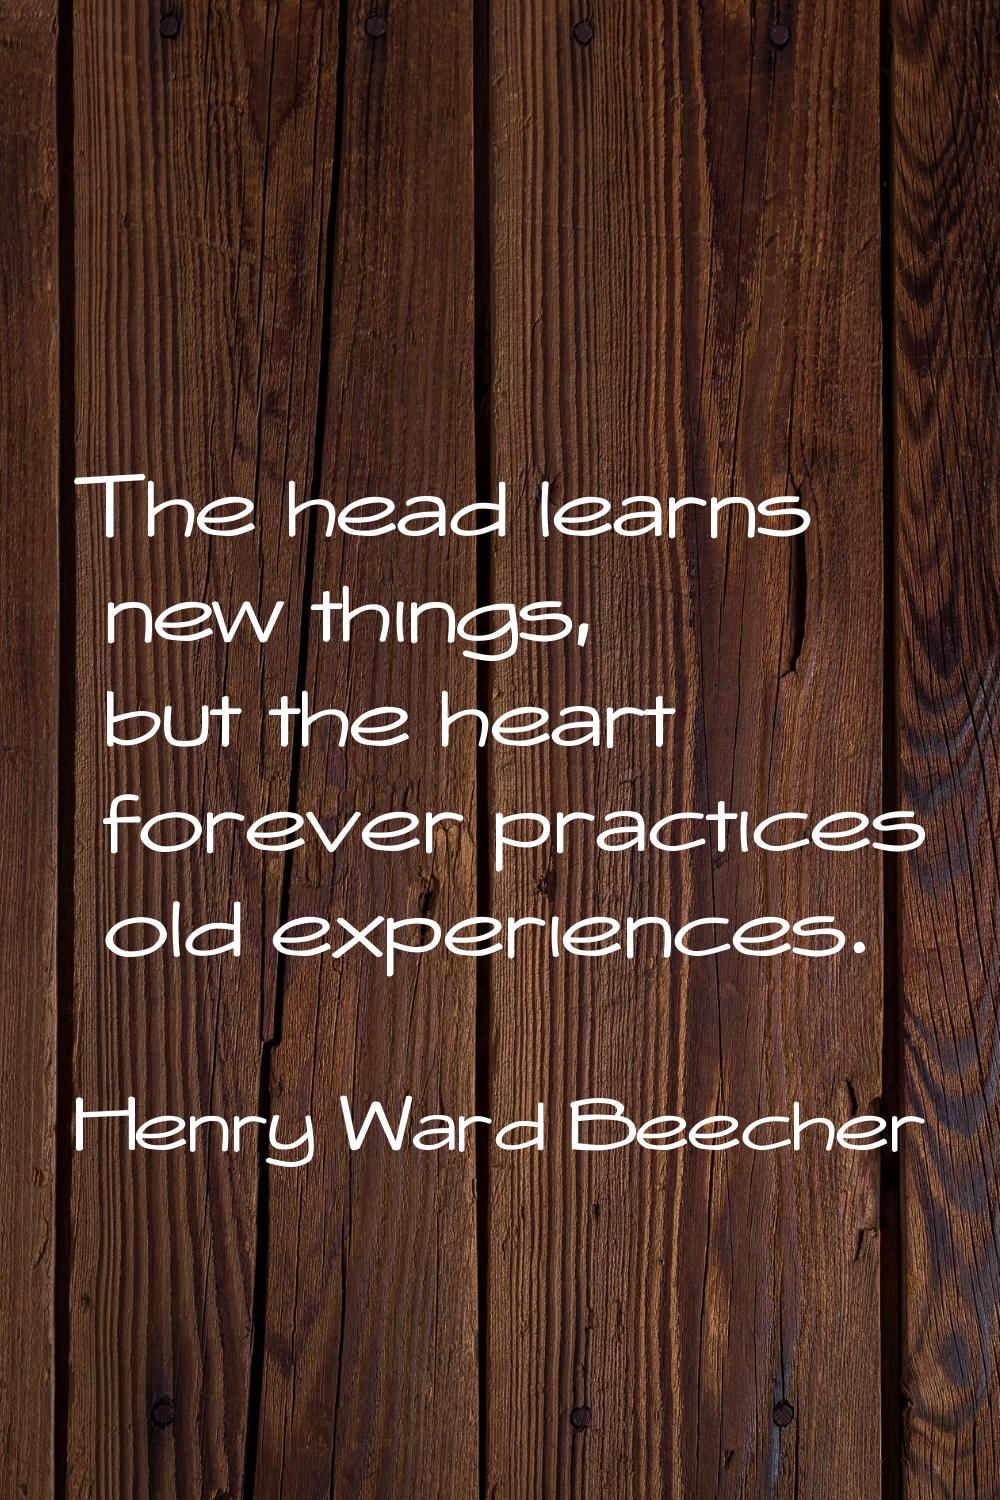 The head learns new things, but the heart forever practices old experiences.